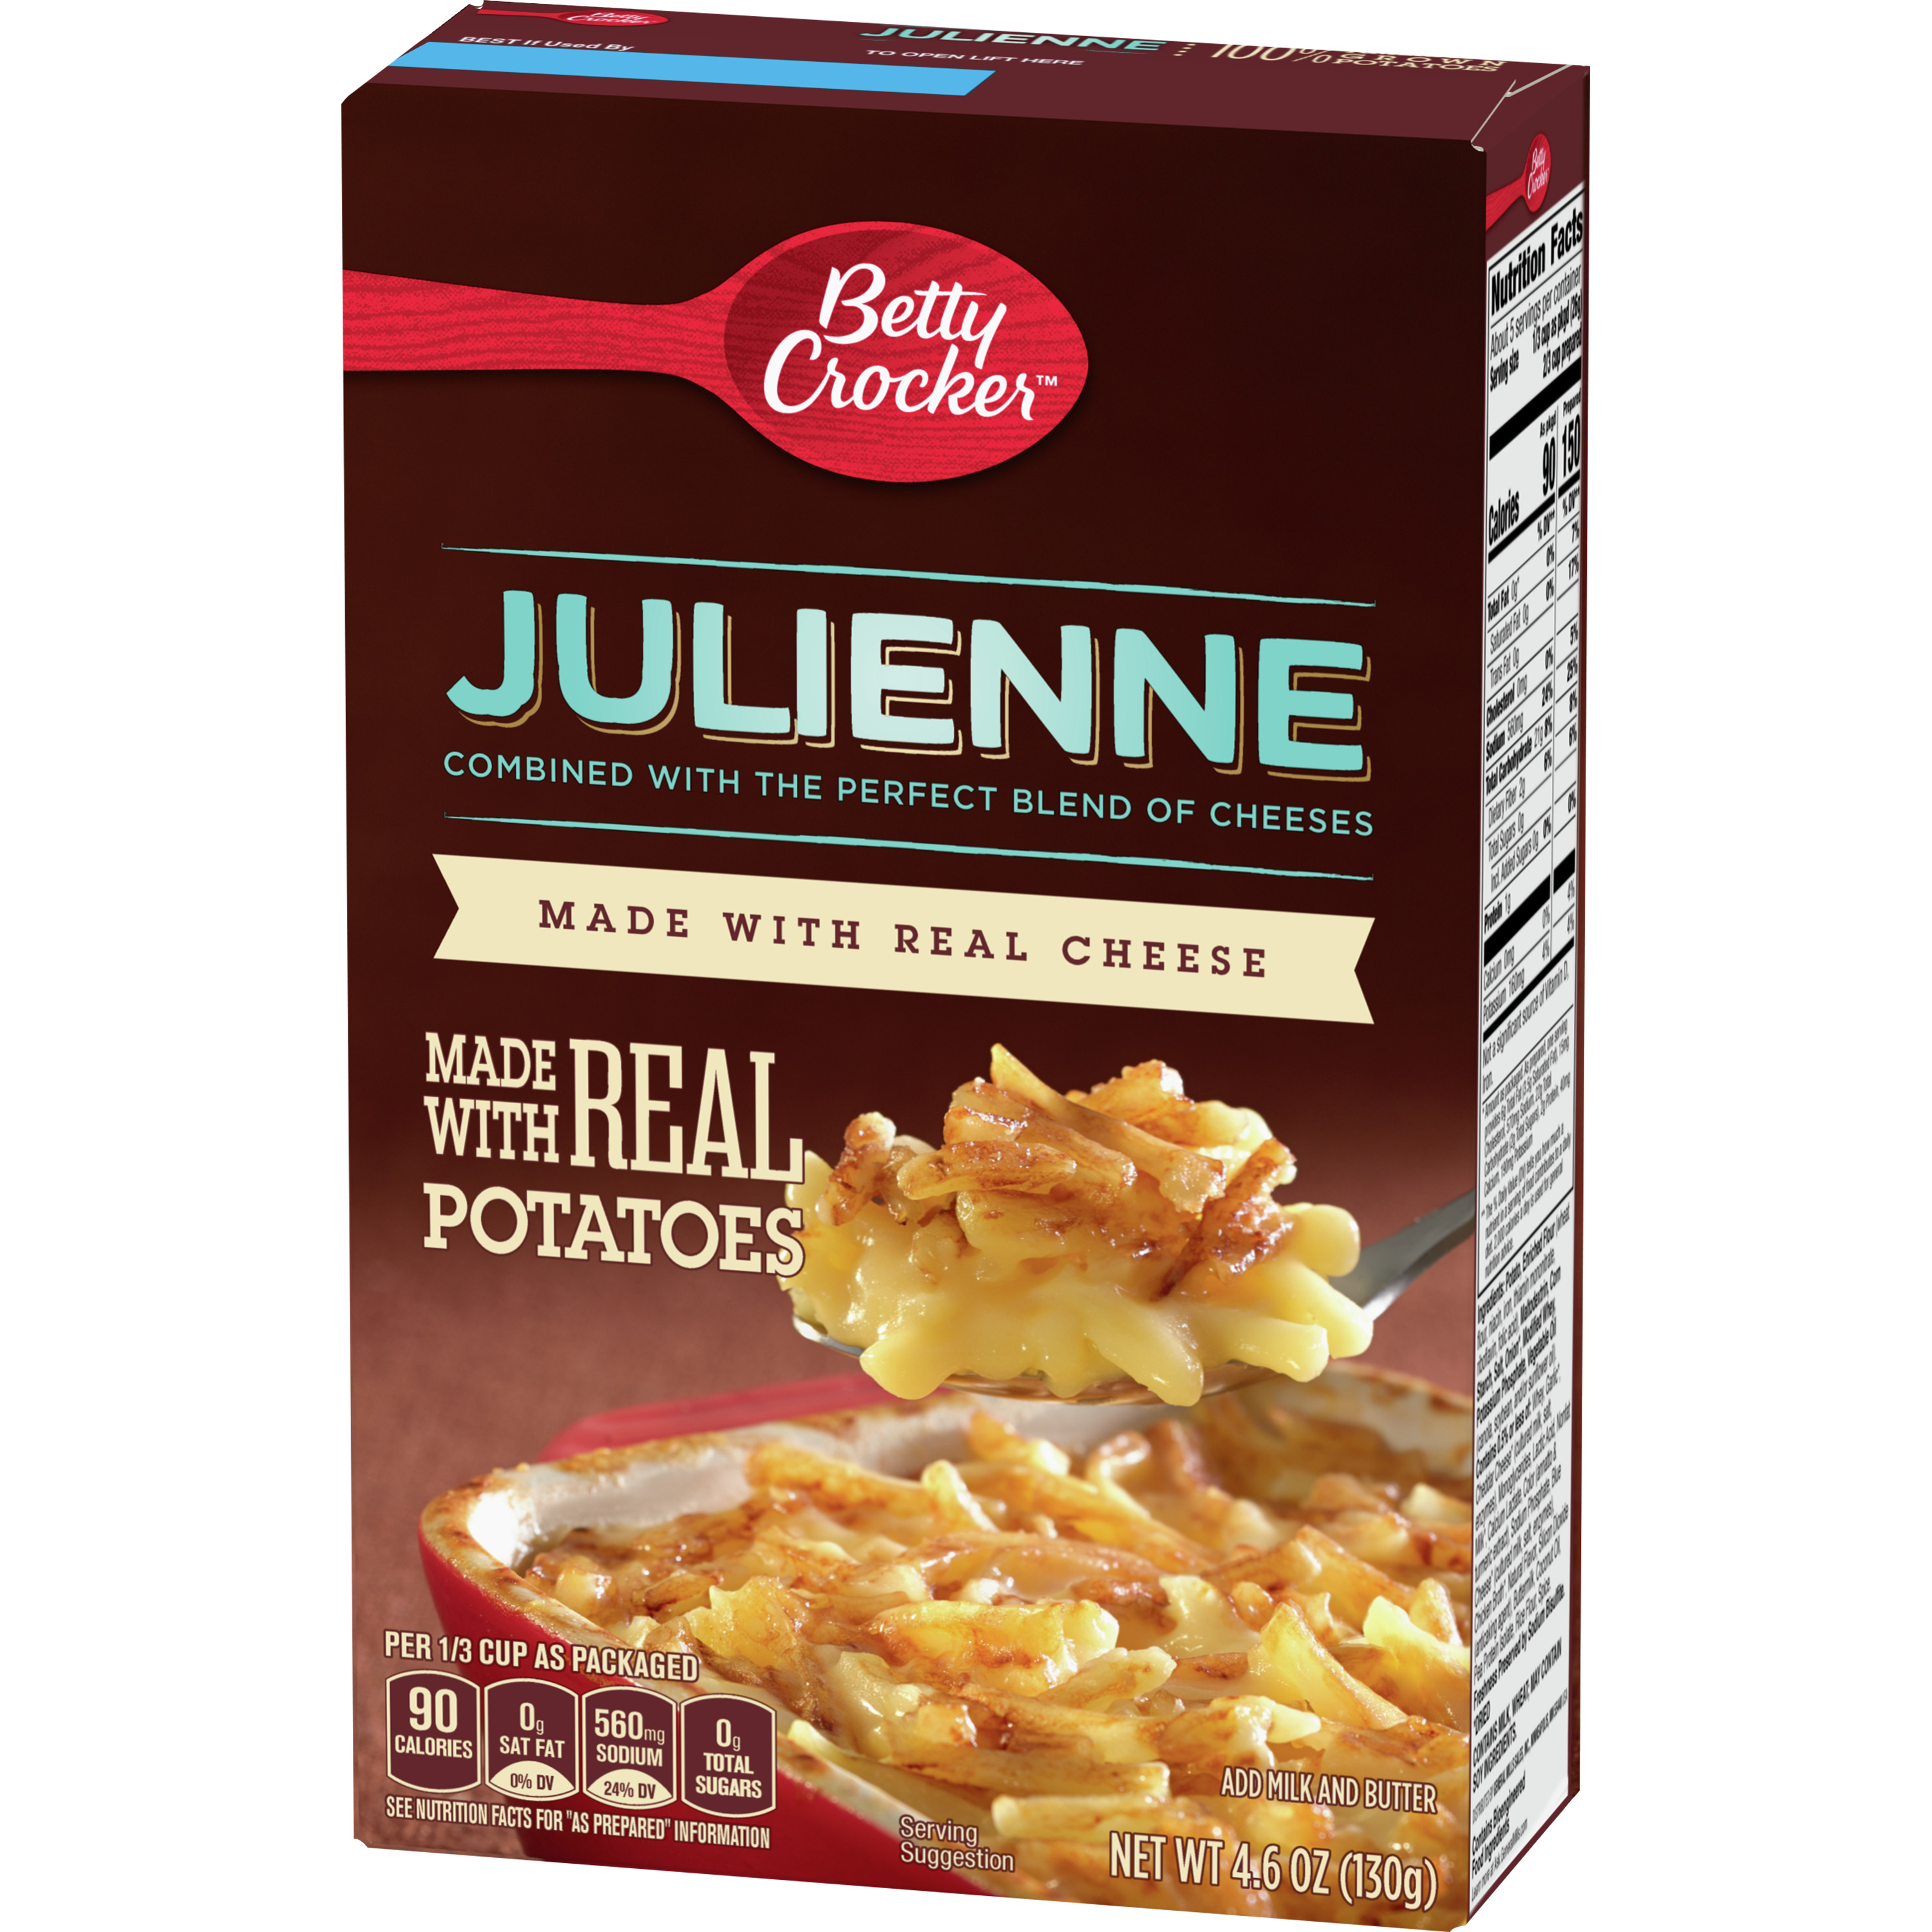 Betty Crocker Julienne Potatoes, Made with Real Cheese, 4.6 oz. - image 4 of 10